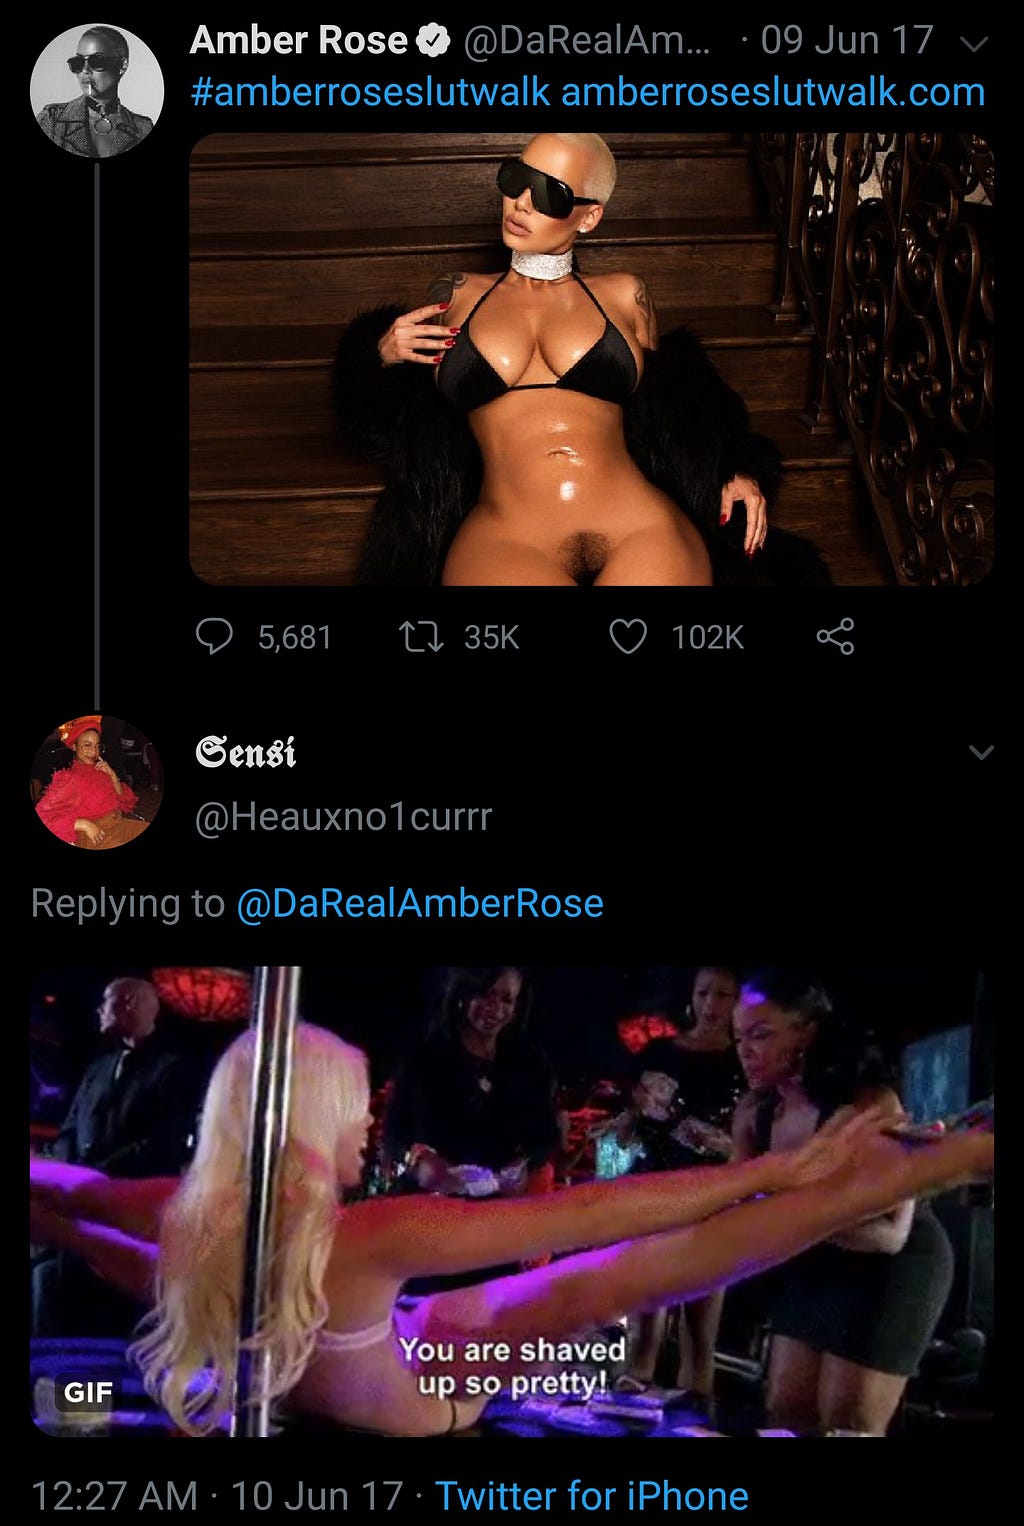 A woman’s positive reply to Amber Rose’s tweet of her exposed pubic area in order to promote her Slut-Walk.